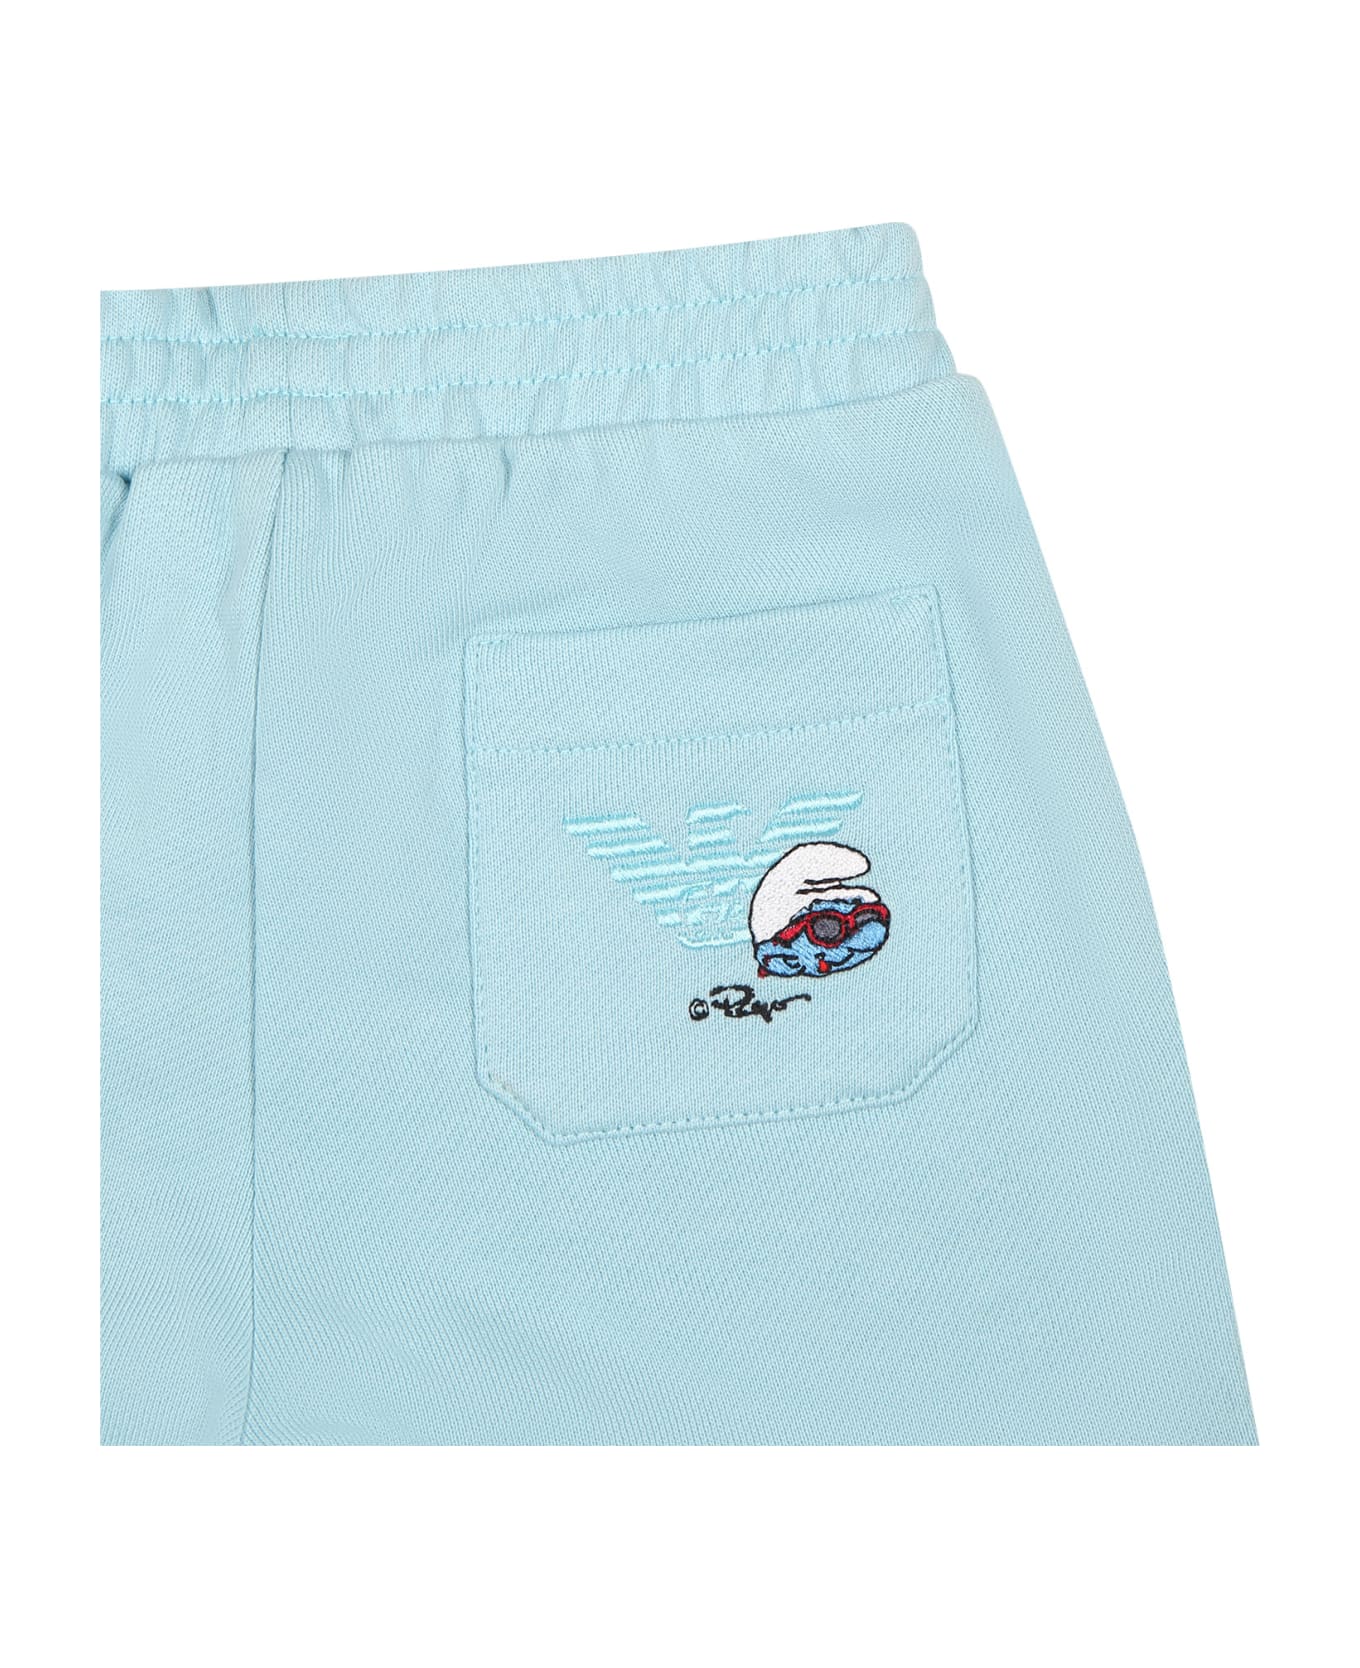 Emporio Armani Light Blue Trousers For Baby Boy With Smurf - Light Blue